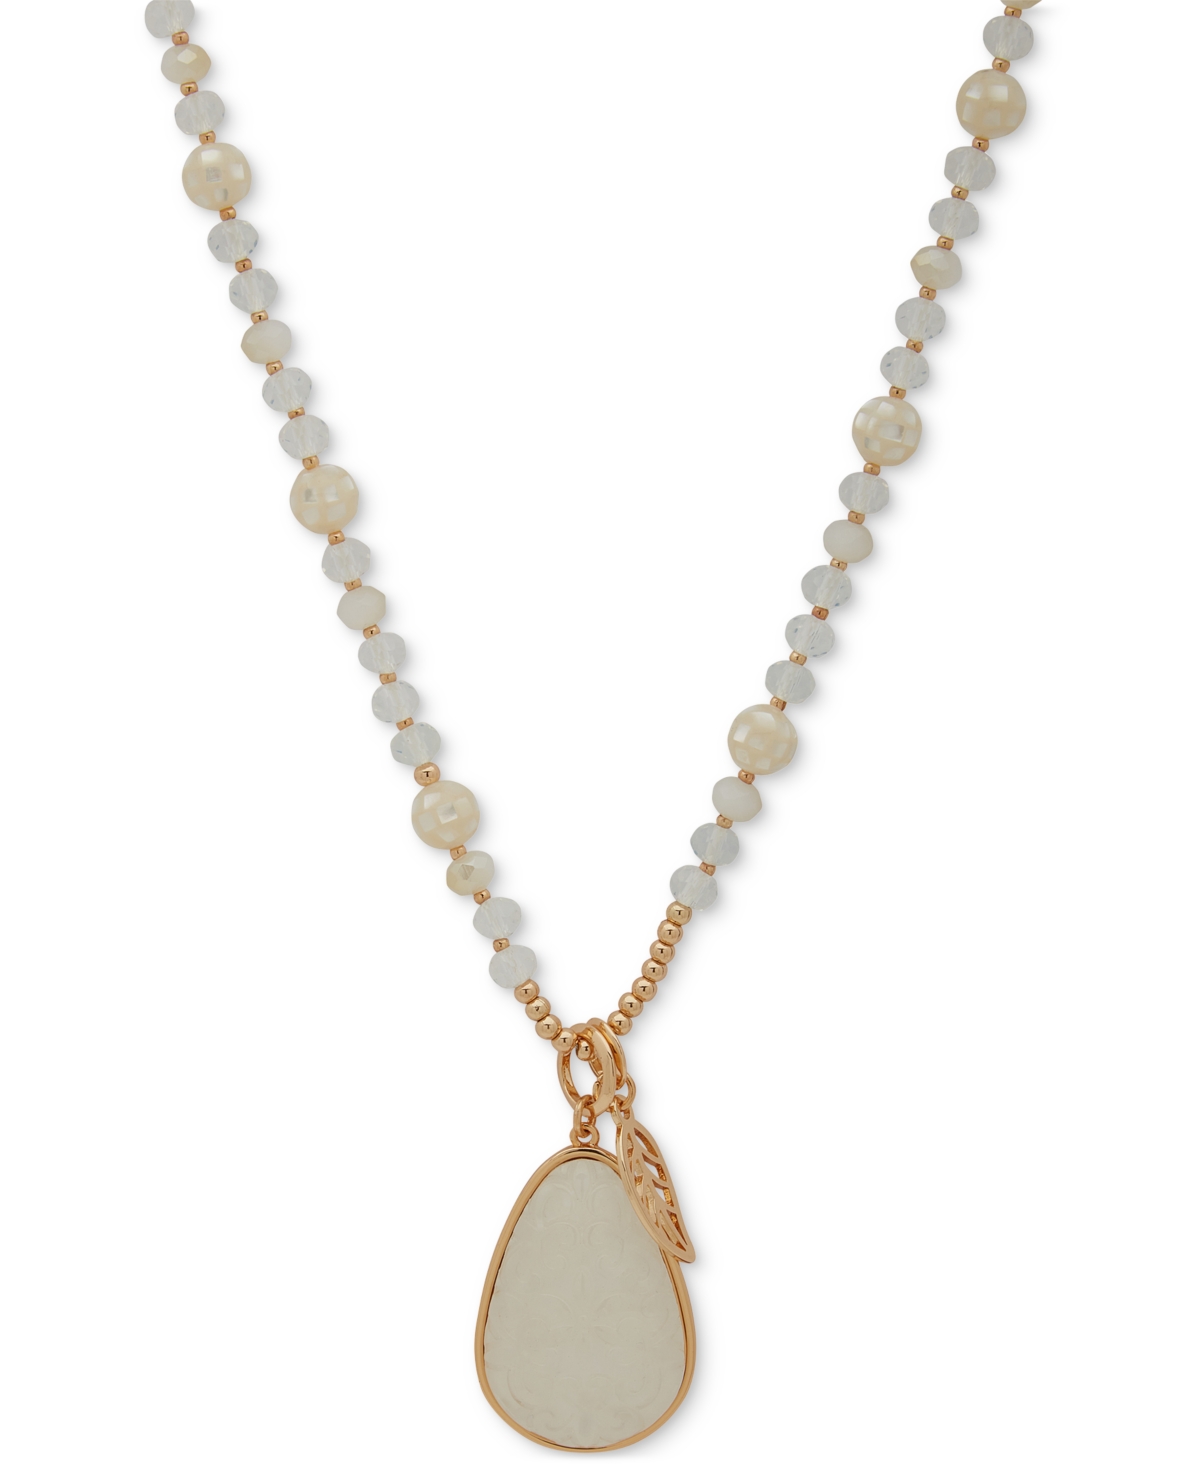 Lonna & Lilly Gold-tone White Long Bead Carved Pendant Necklace, 30" + 3" Extender